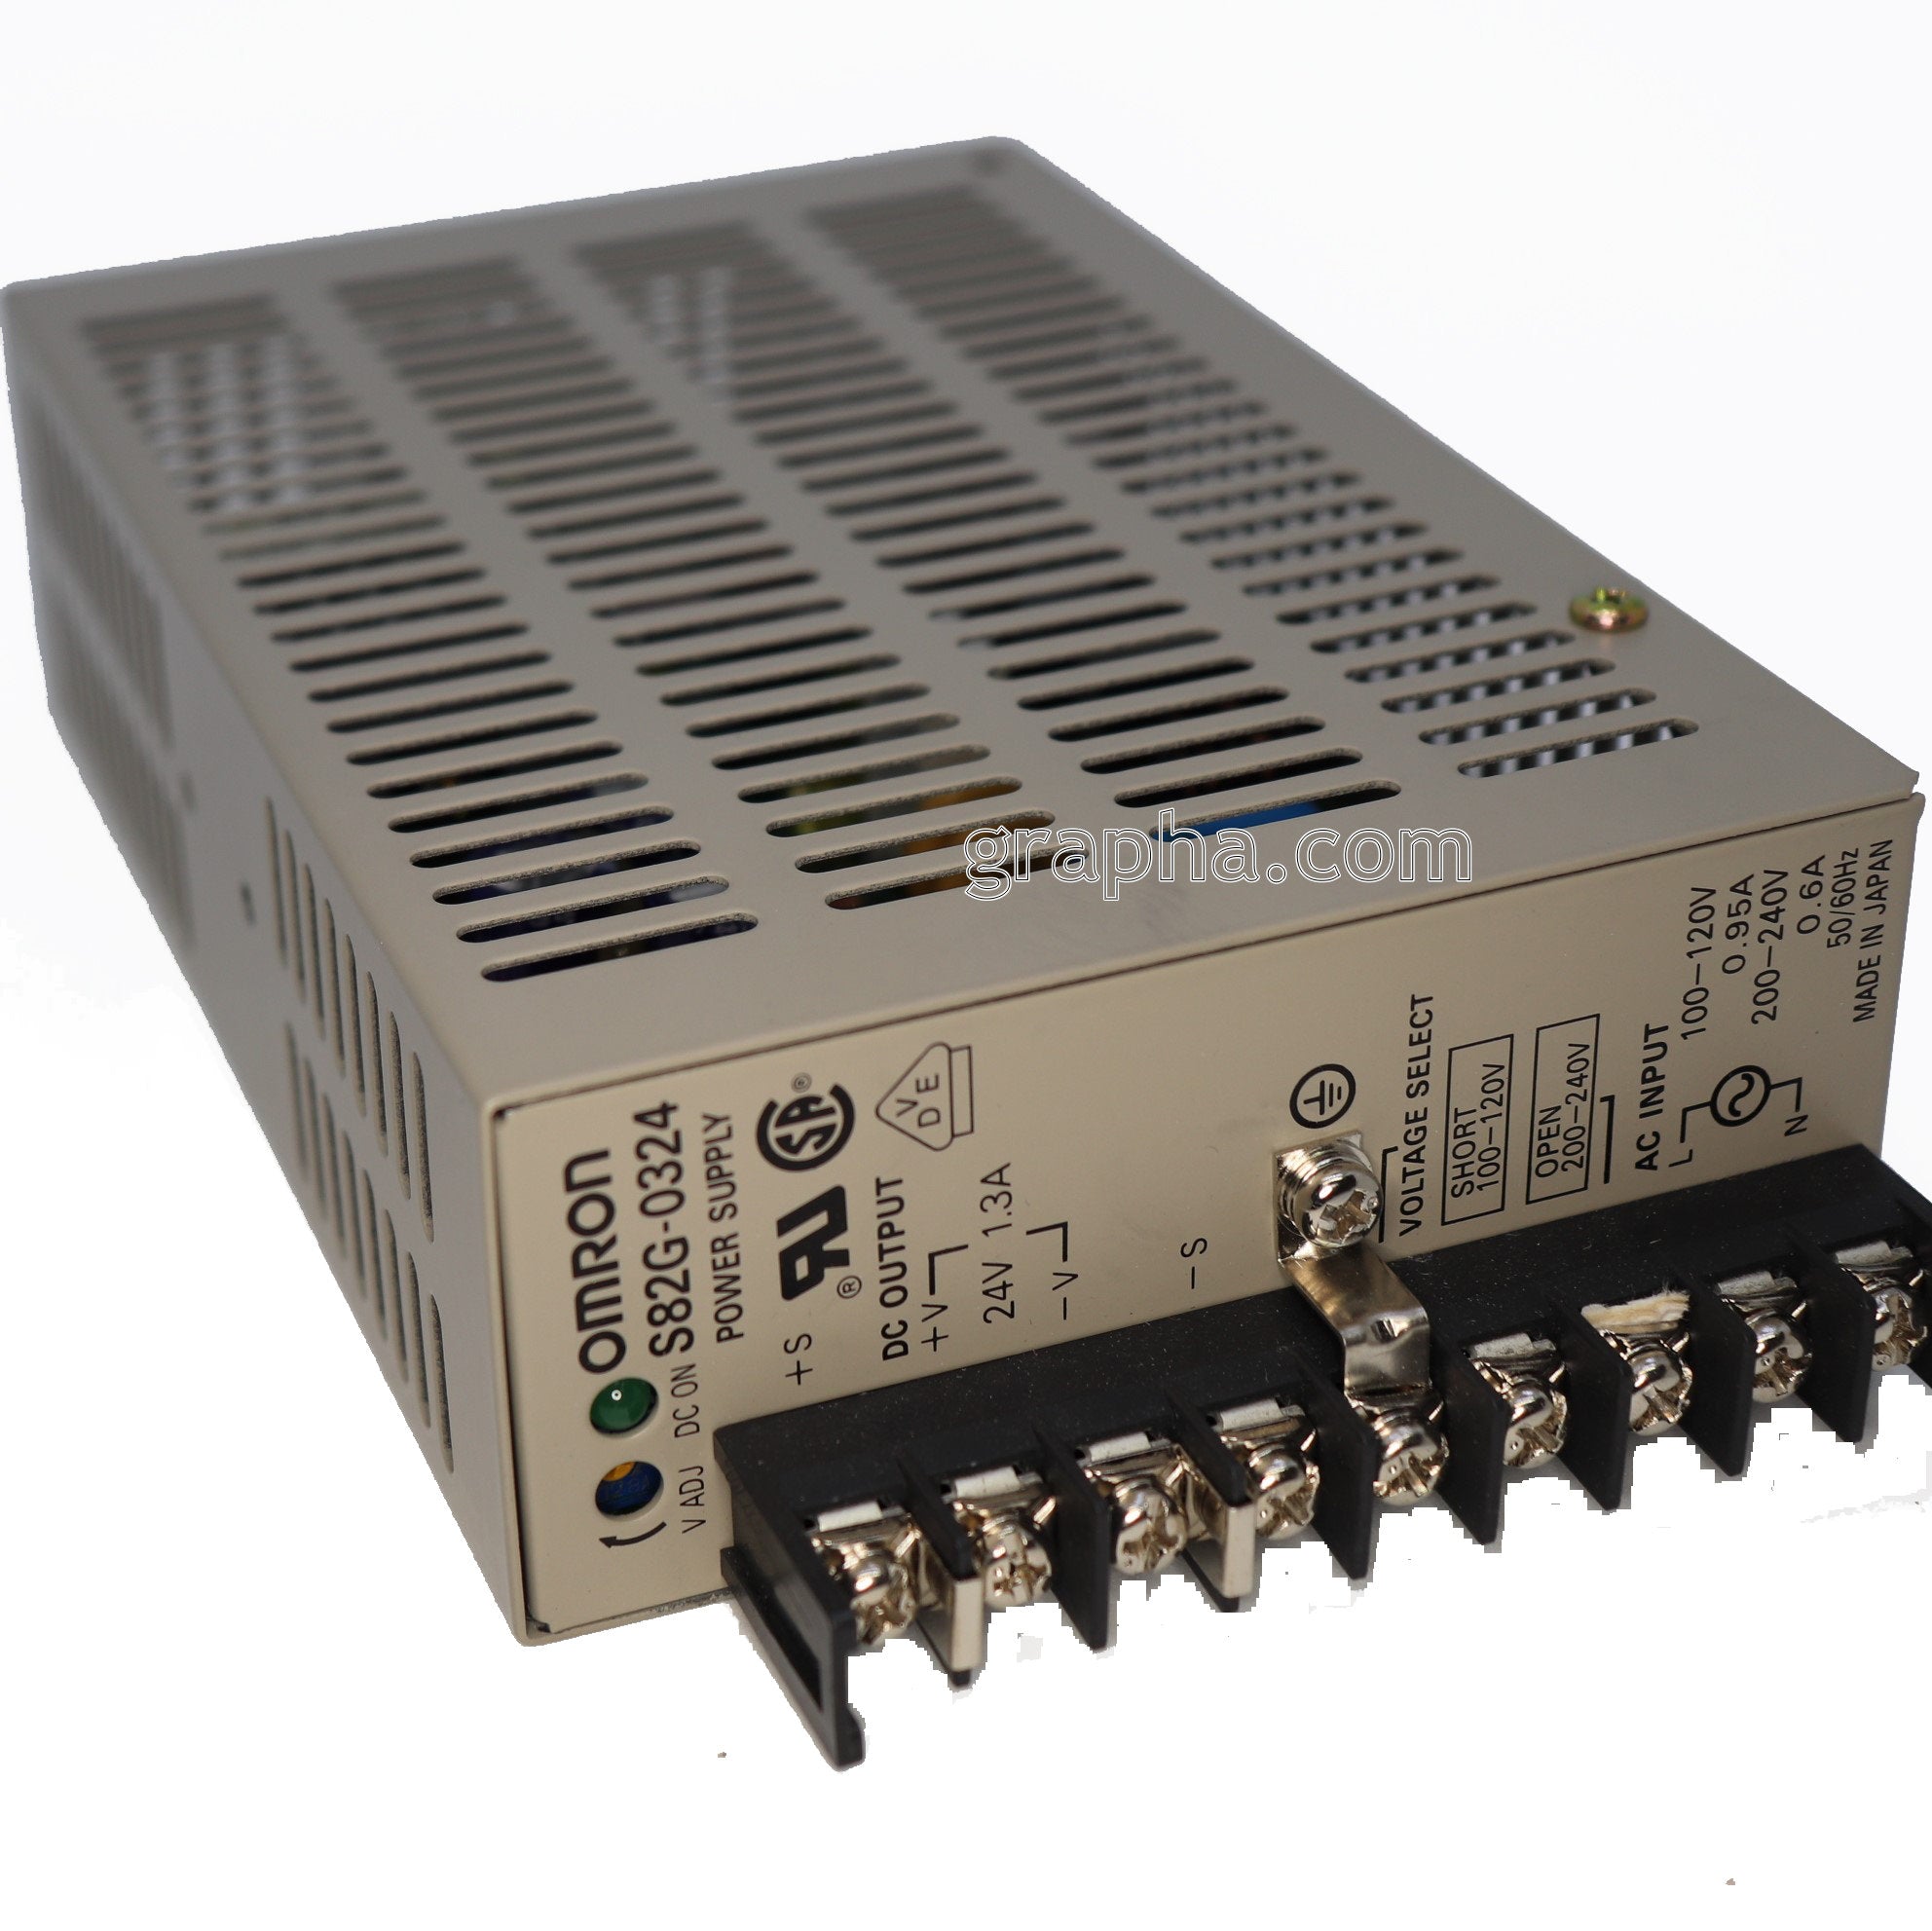 Omron power supply: S82G-0324